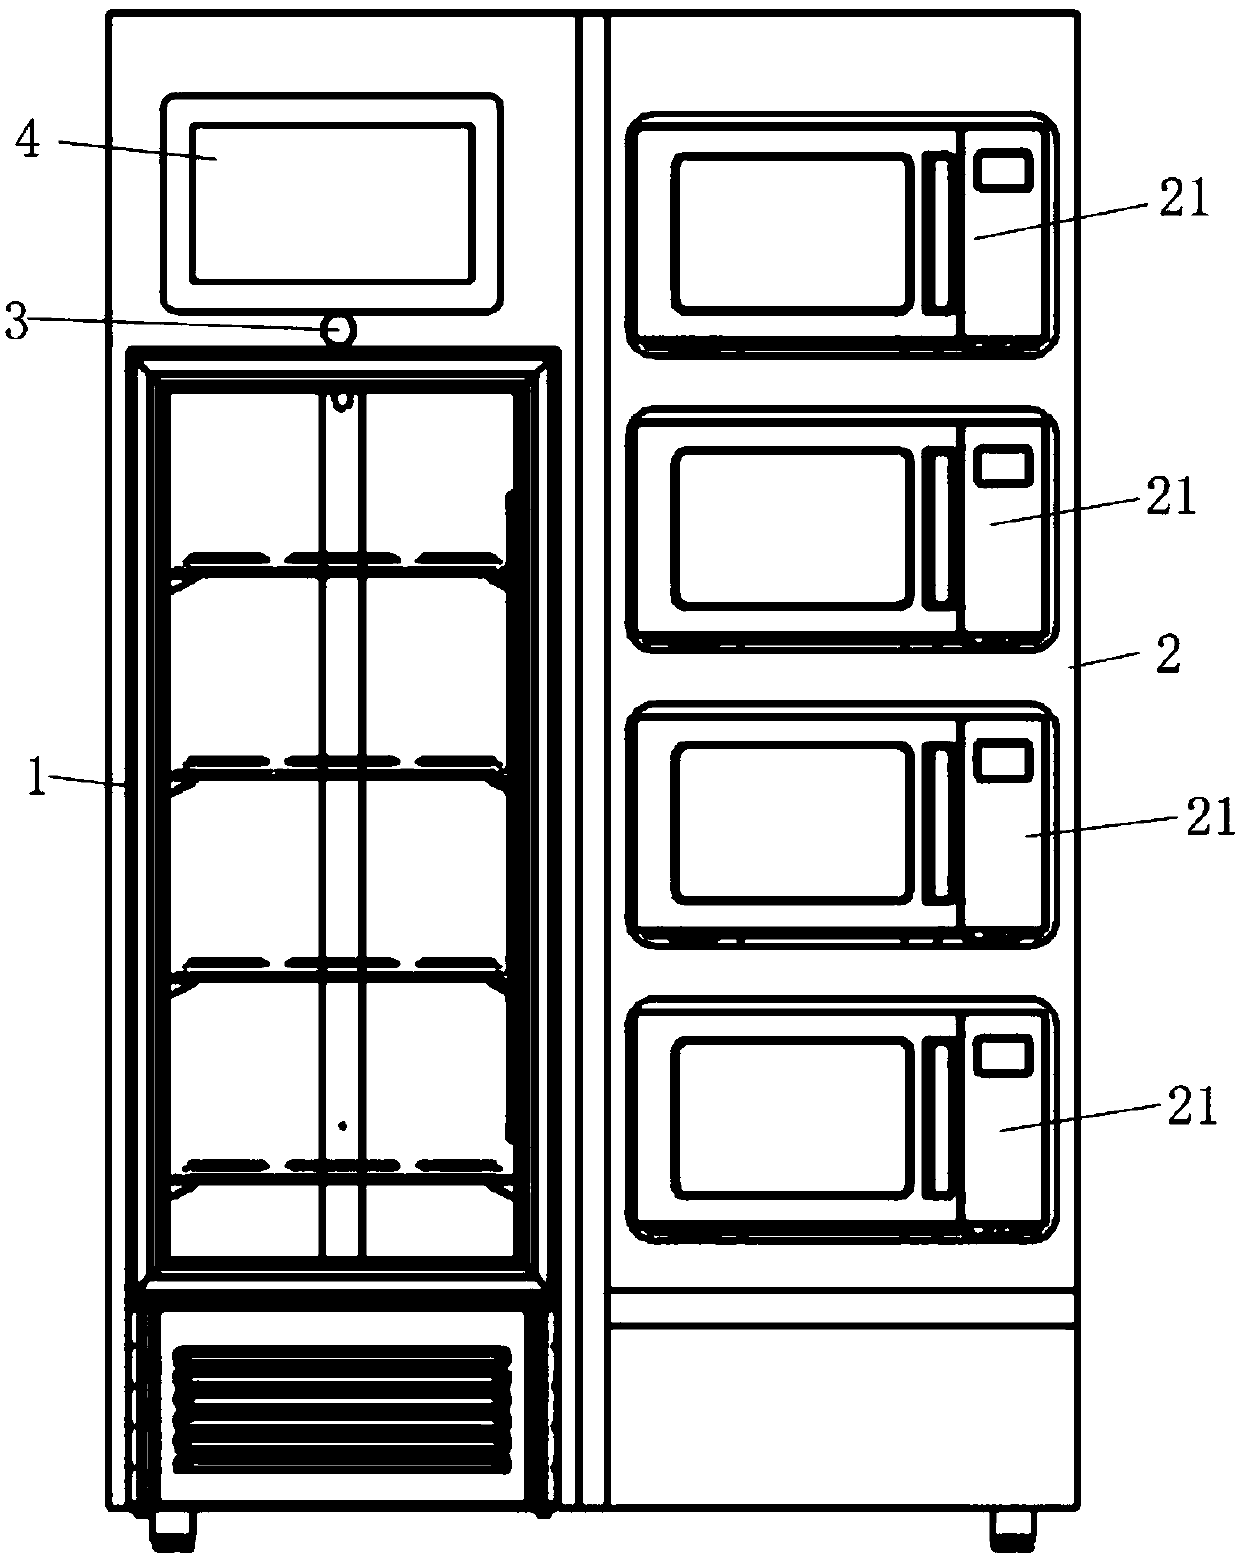 Self-service sharing cooking device and method